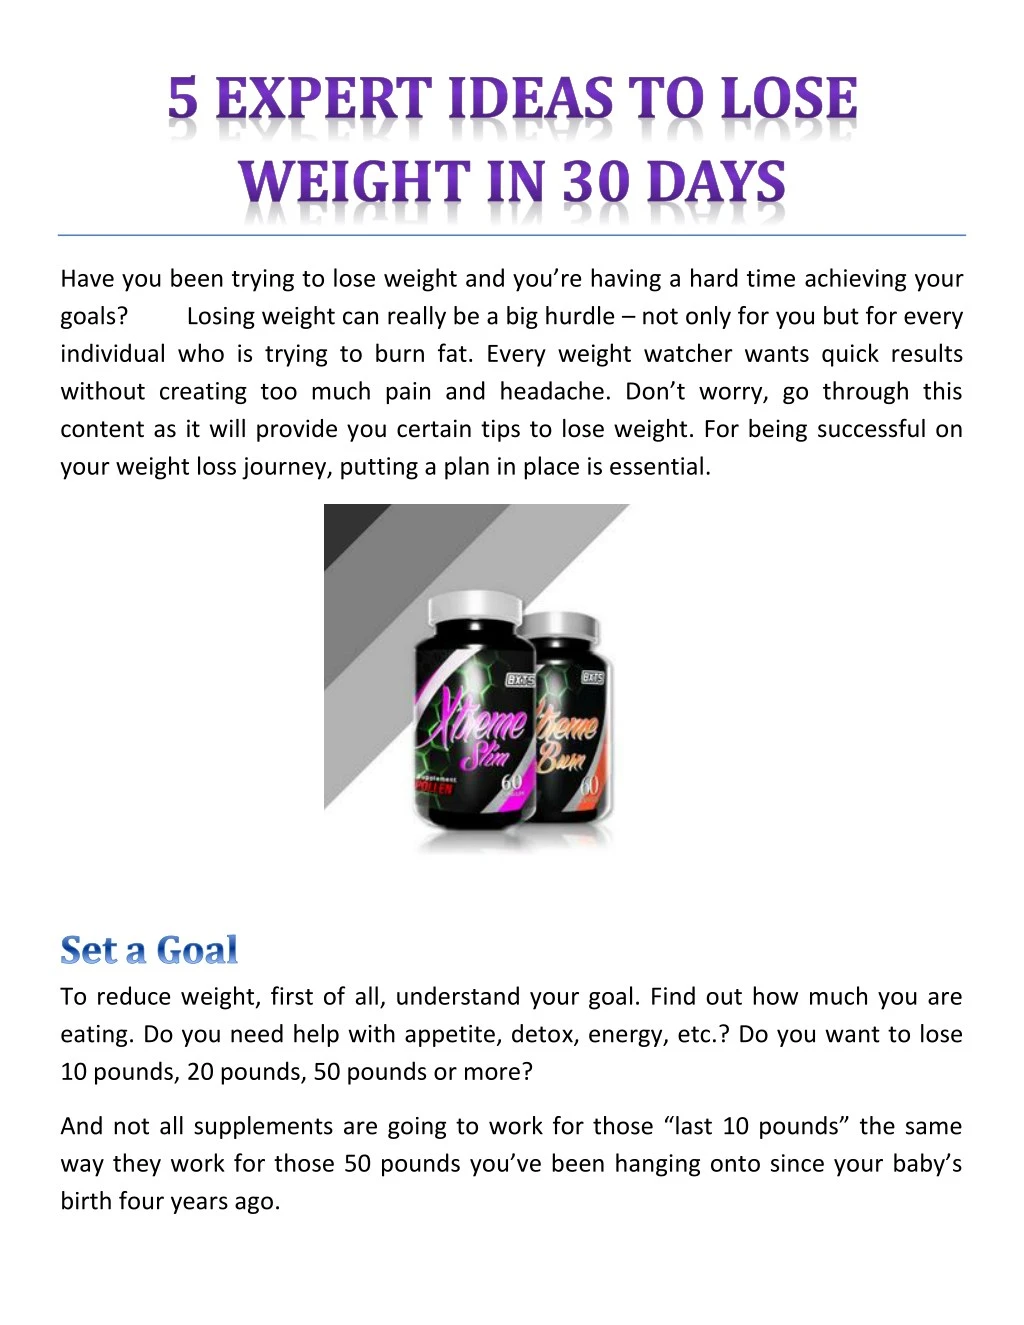 have you been trying to lose weight